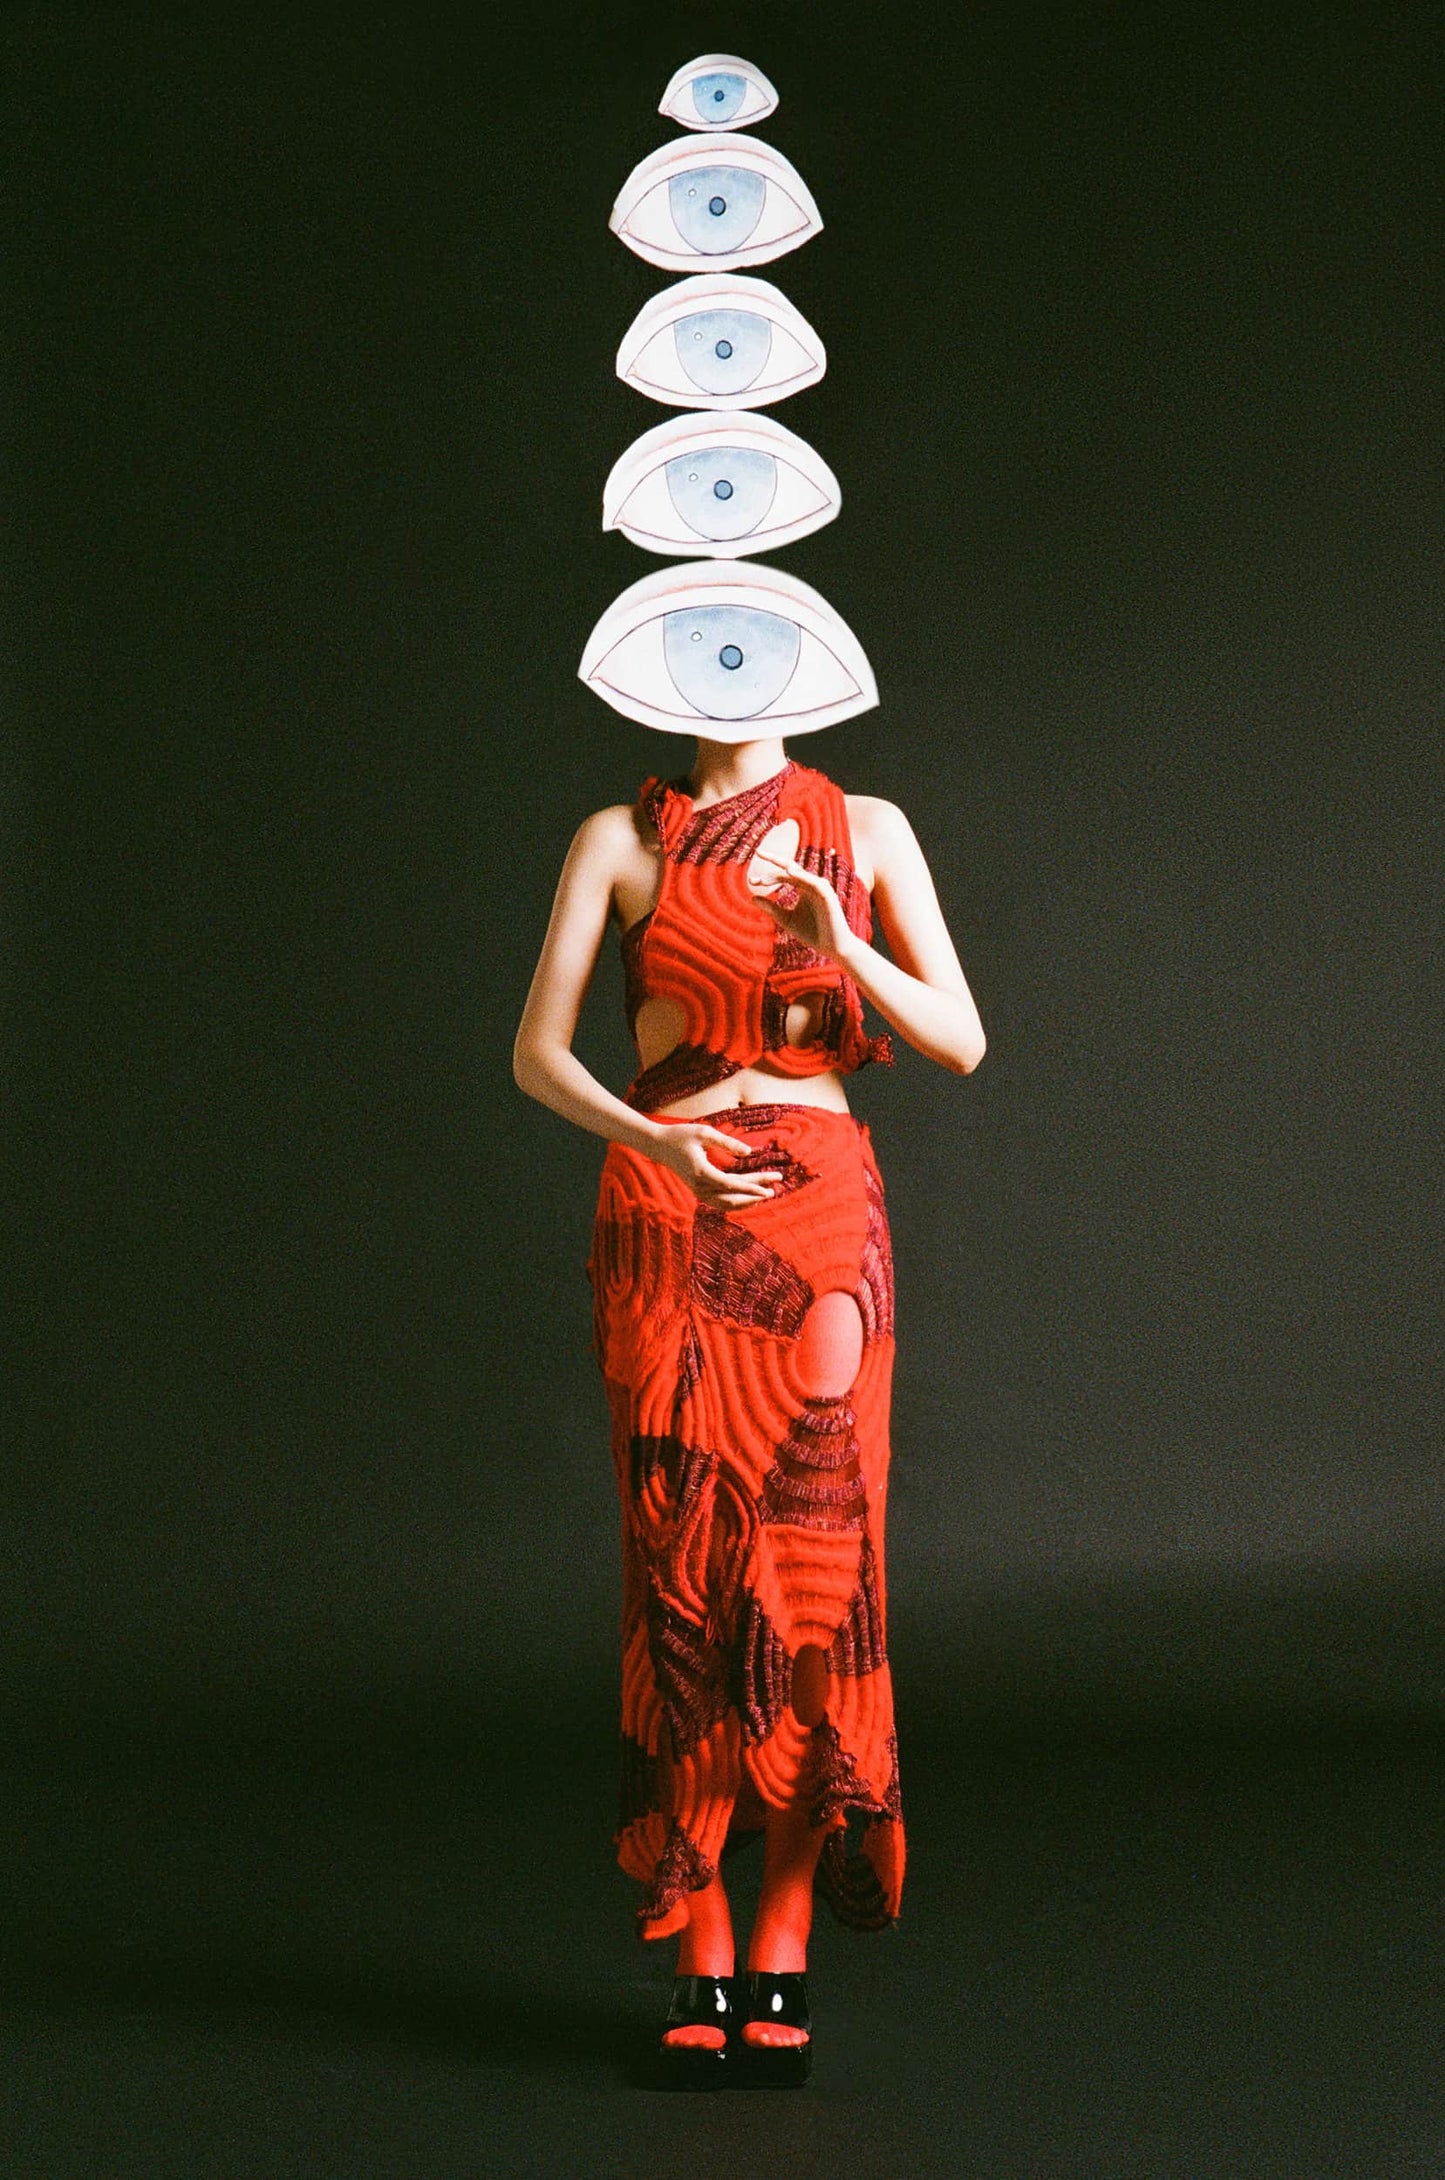 The artpiece 'Hide' by Hui Long shows a woman in a red dress, holding up many all seeing eyes, one of which covered her entire face.